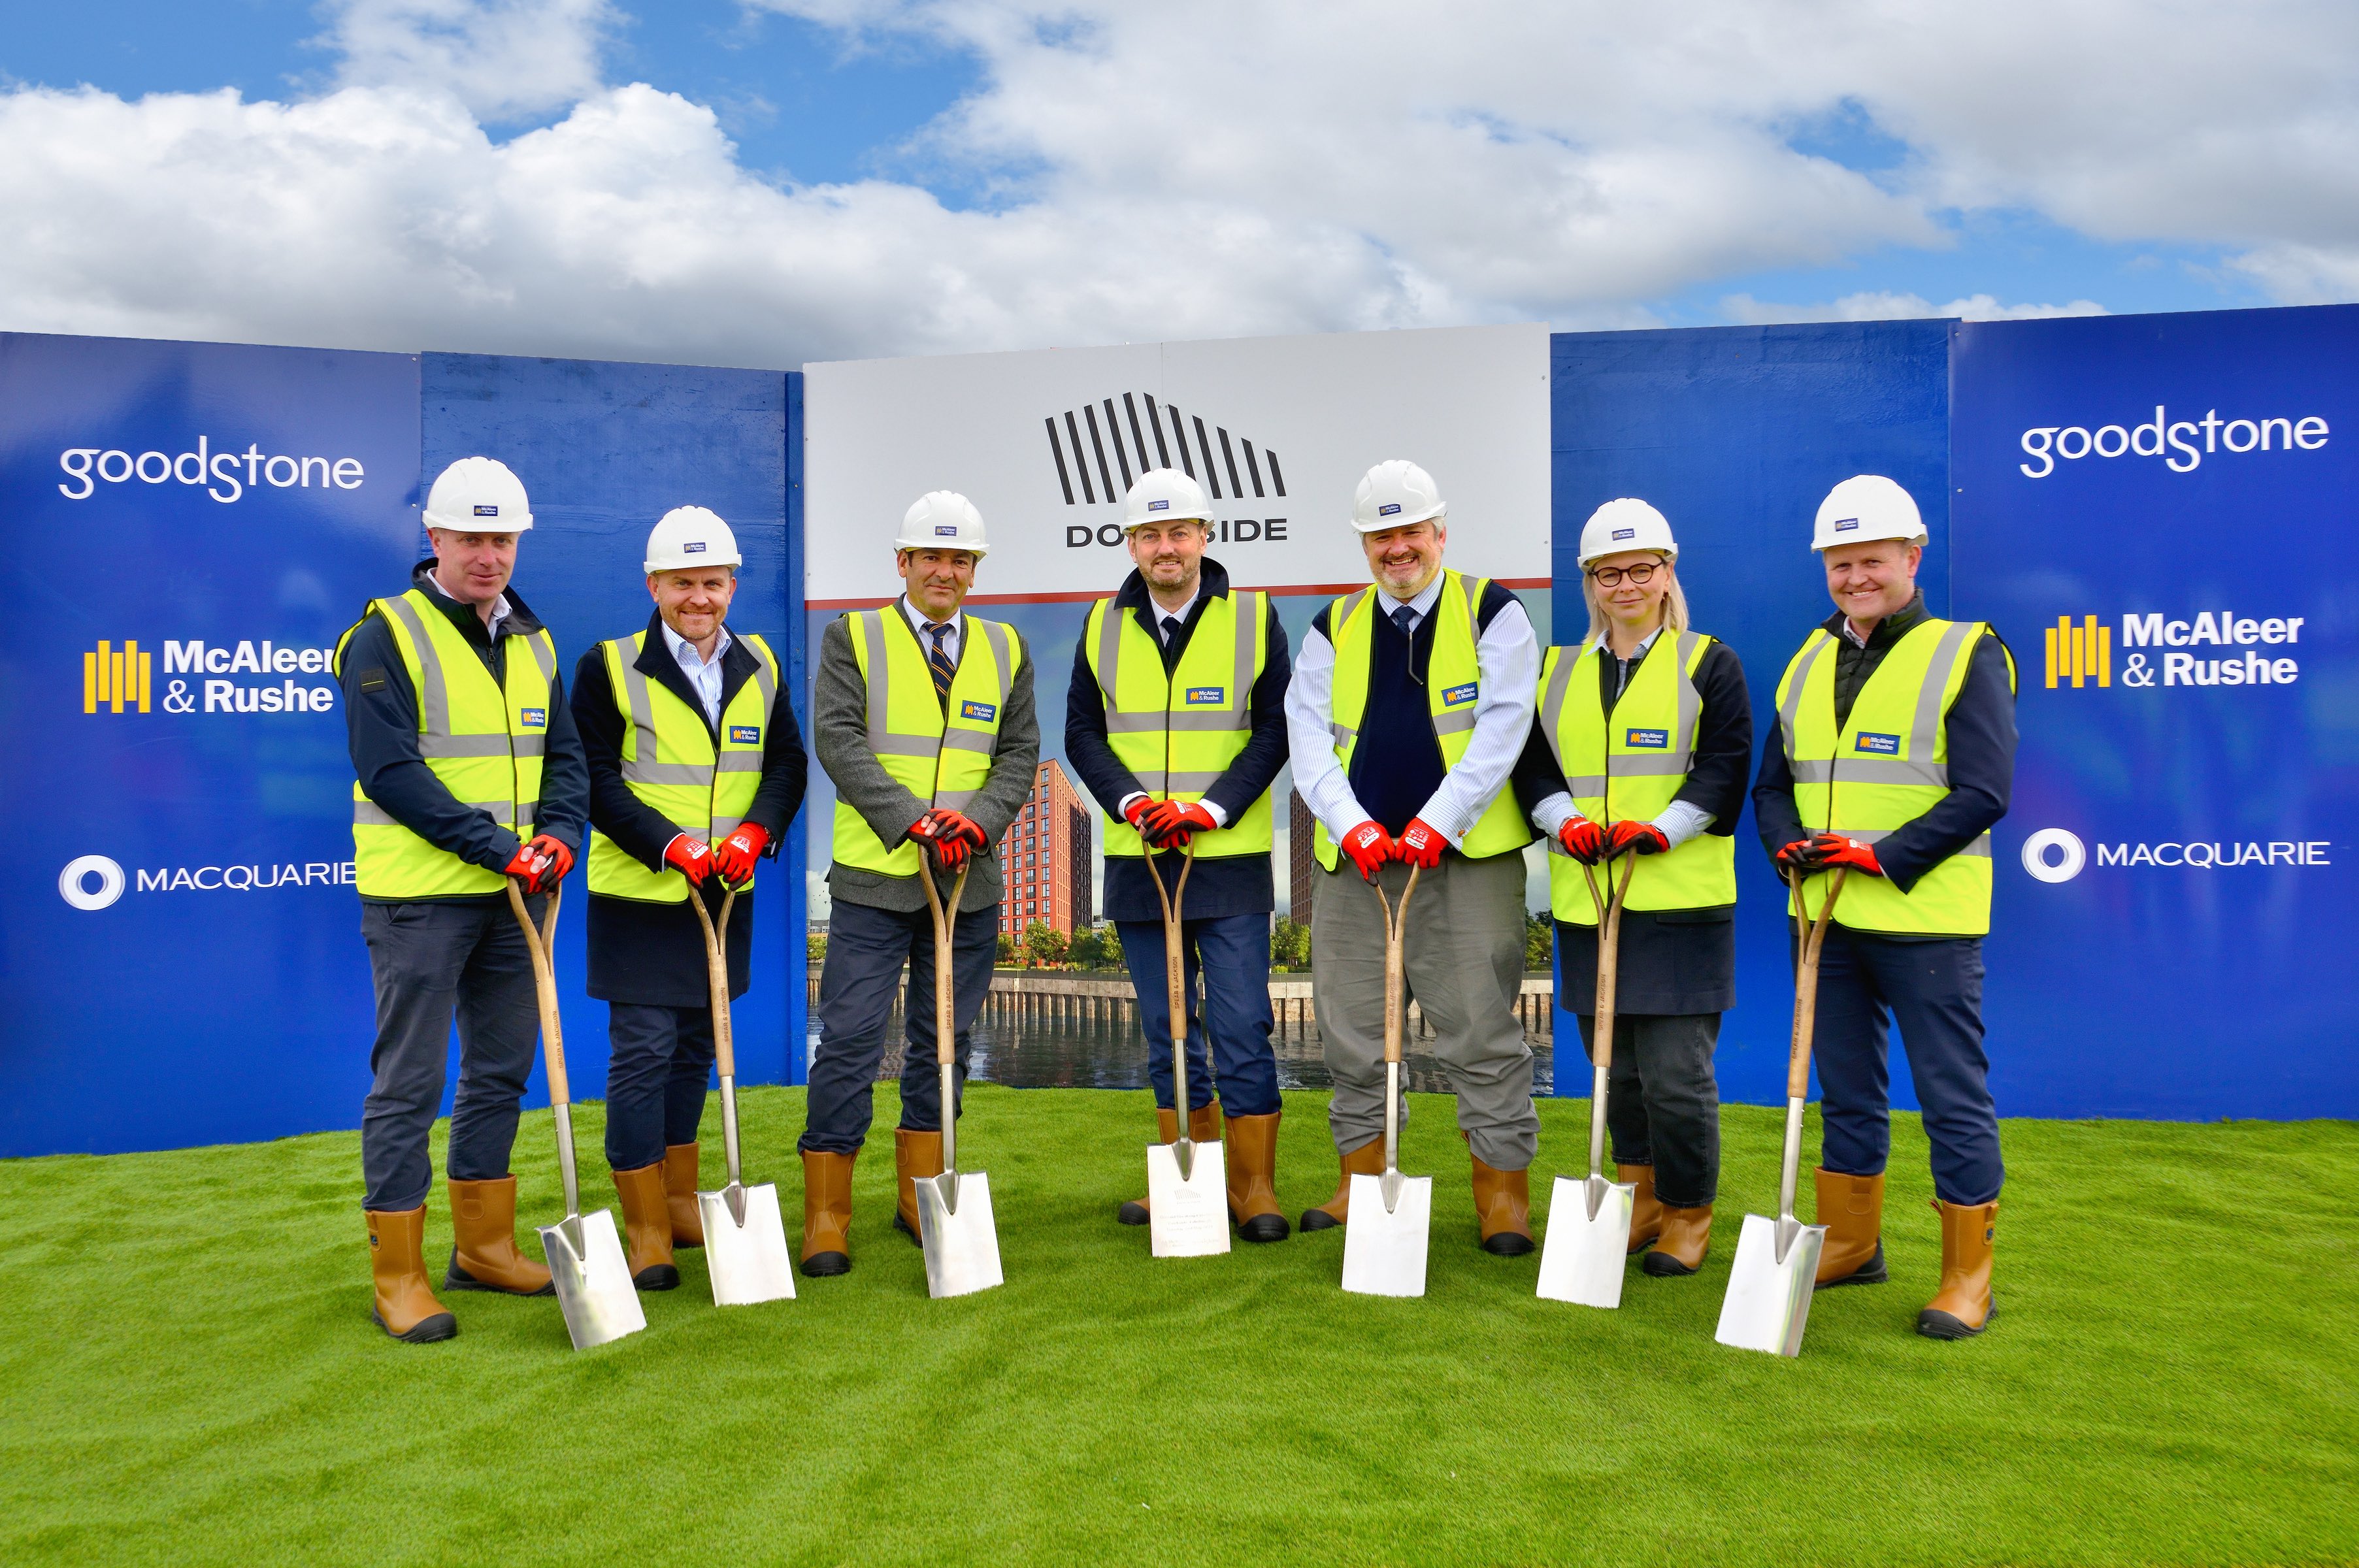 Work starts on 338 build-to-rent apartments in Leith